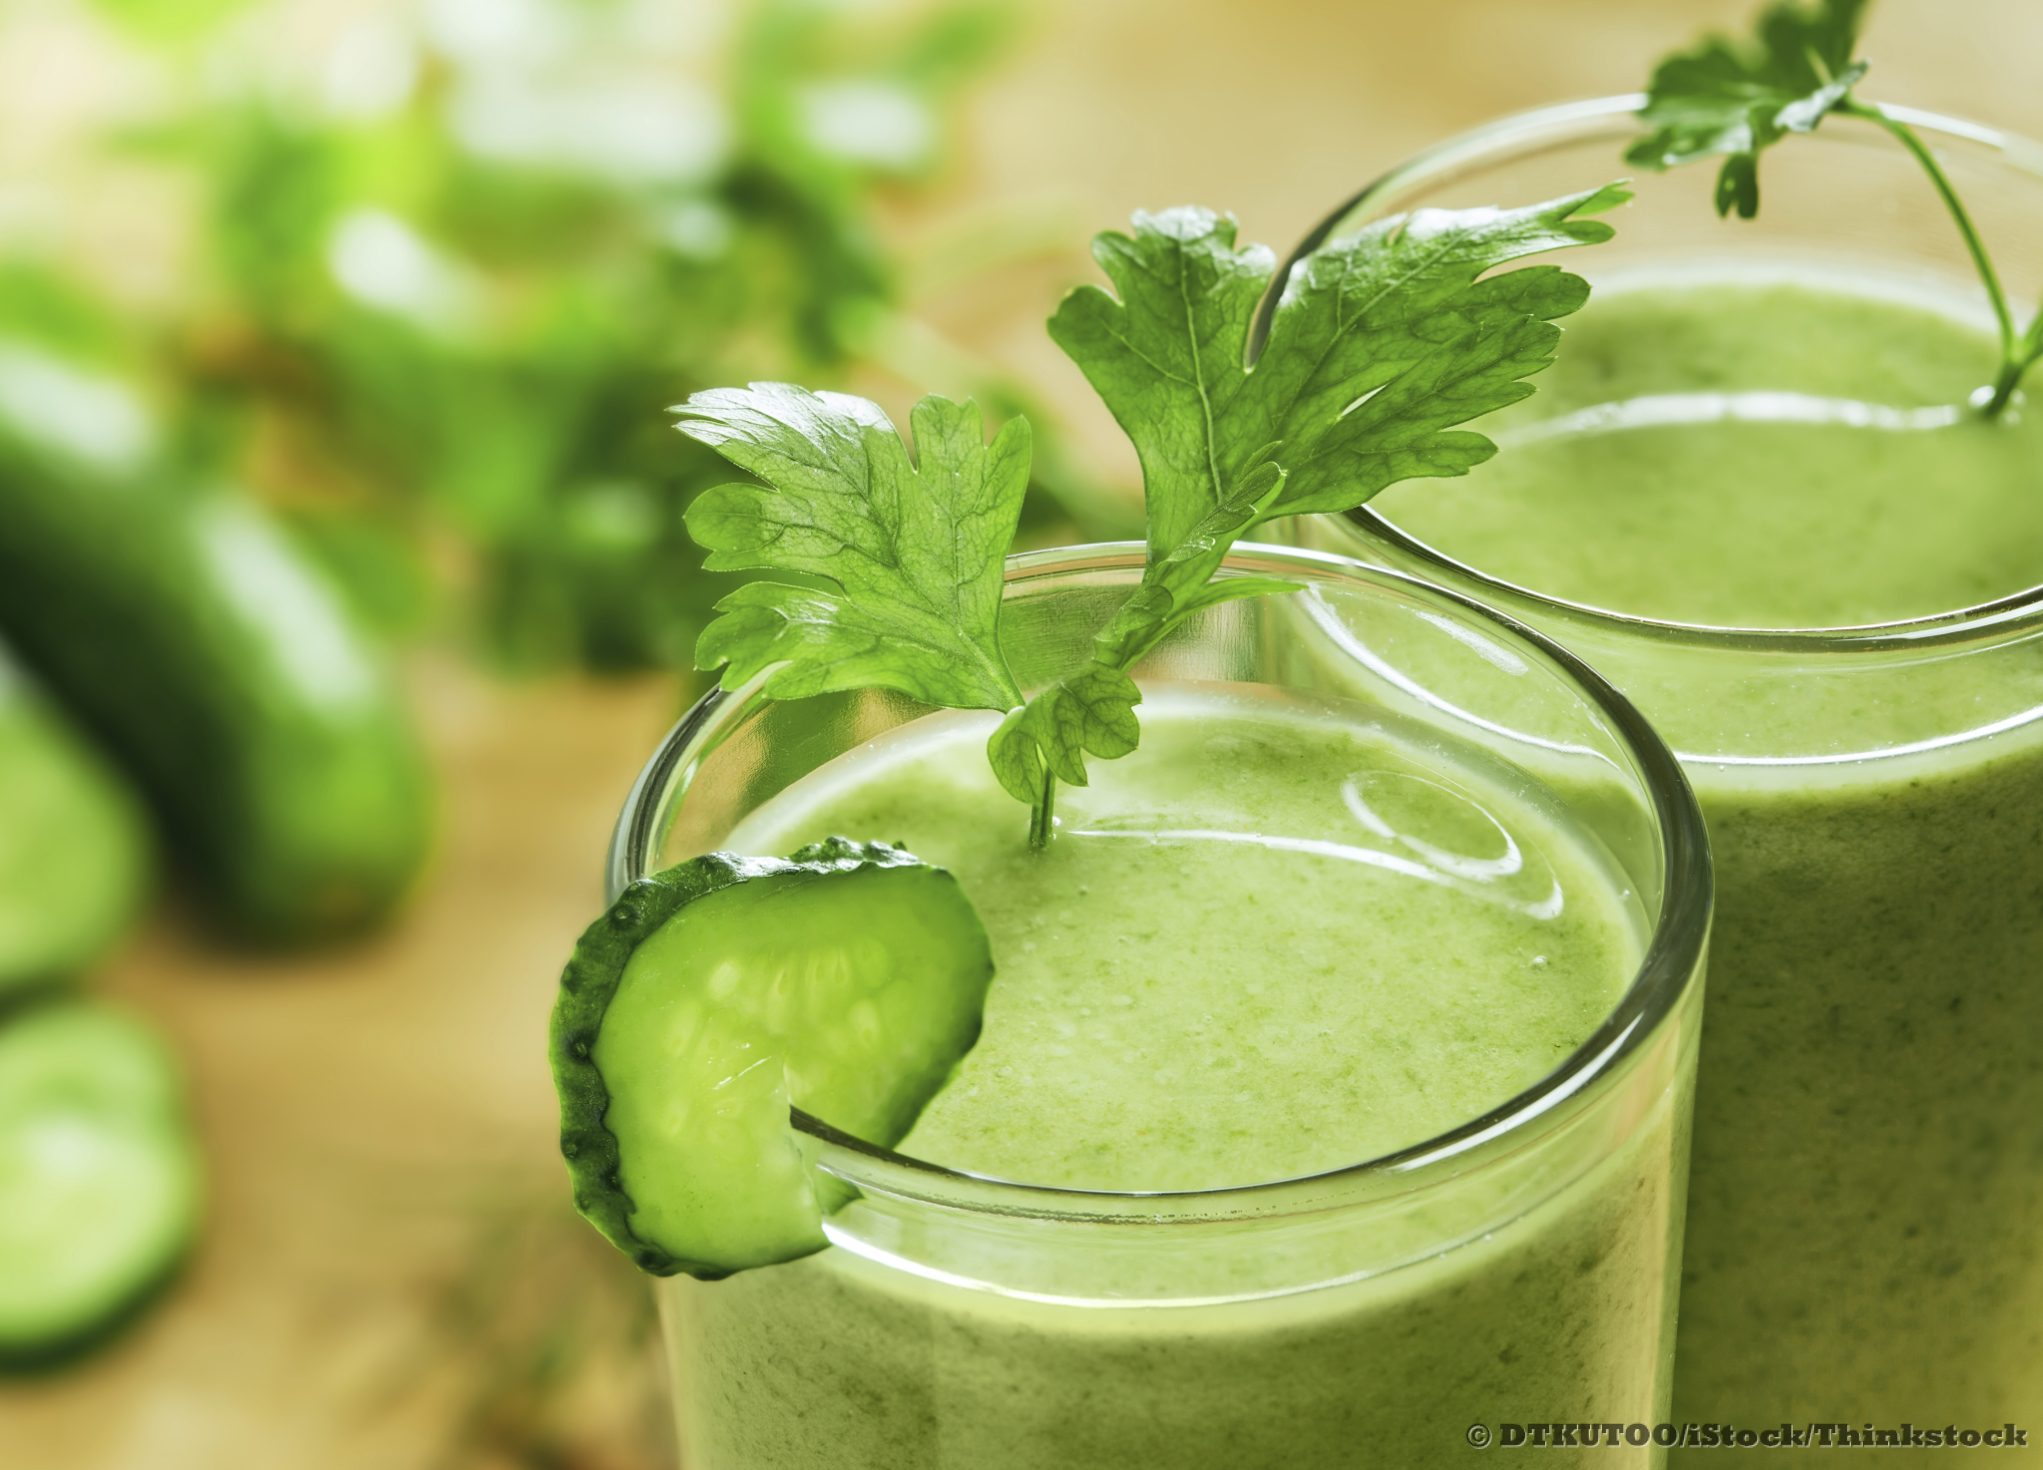 Do green smoothies really “devastate your health”?